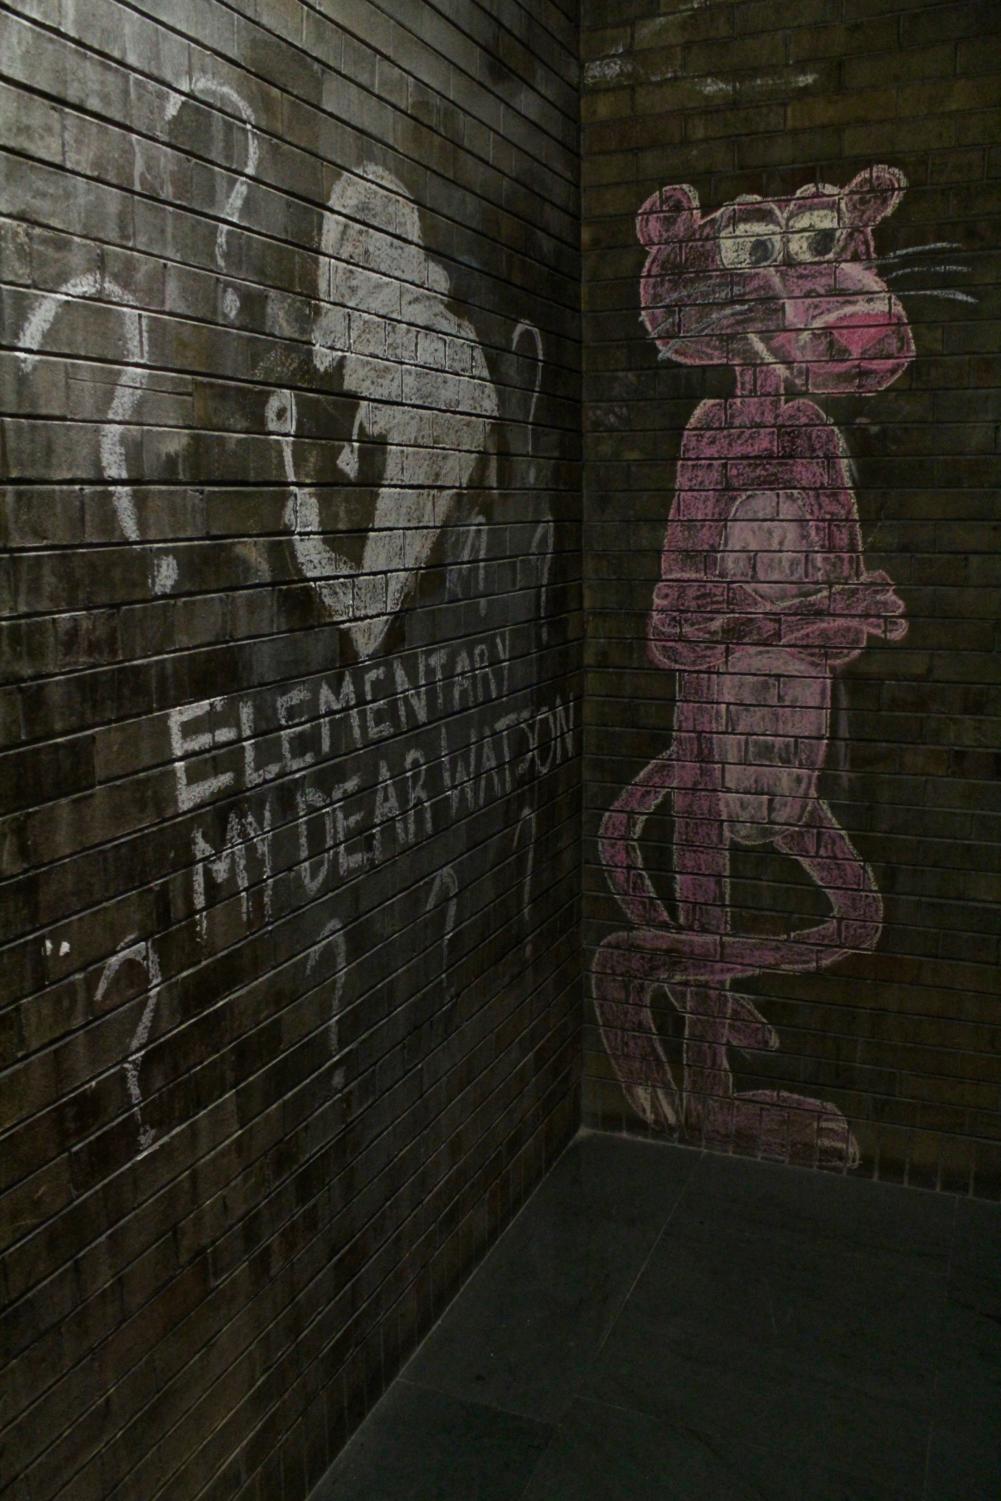 Spy-themed images etched on the brick walls by O-Aids and other leaders of Chamberlin House before first-years arrived.